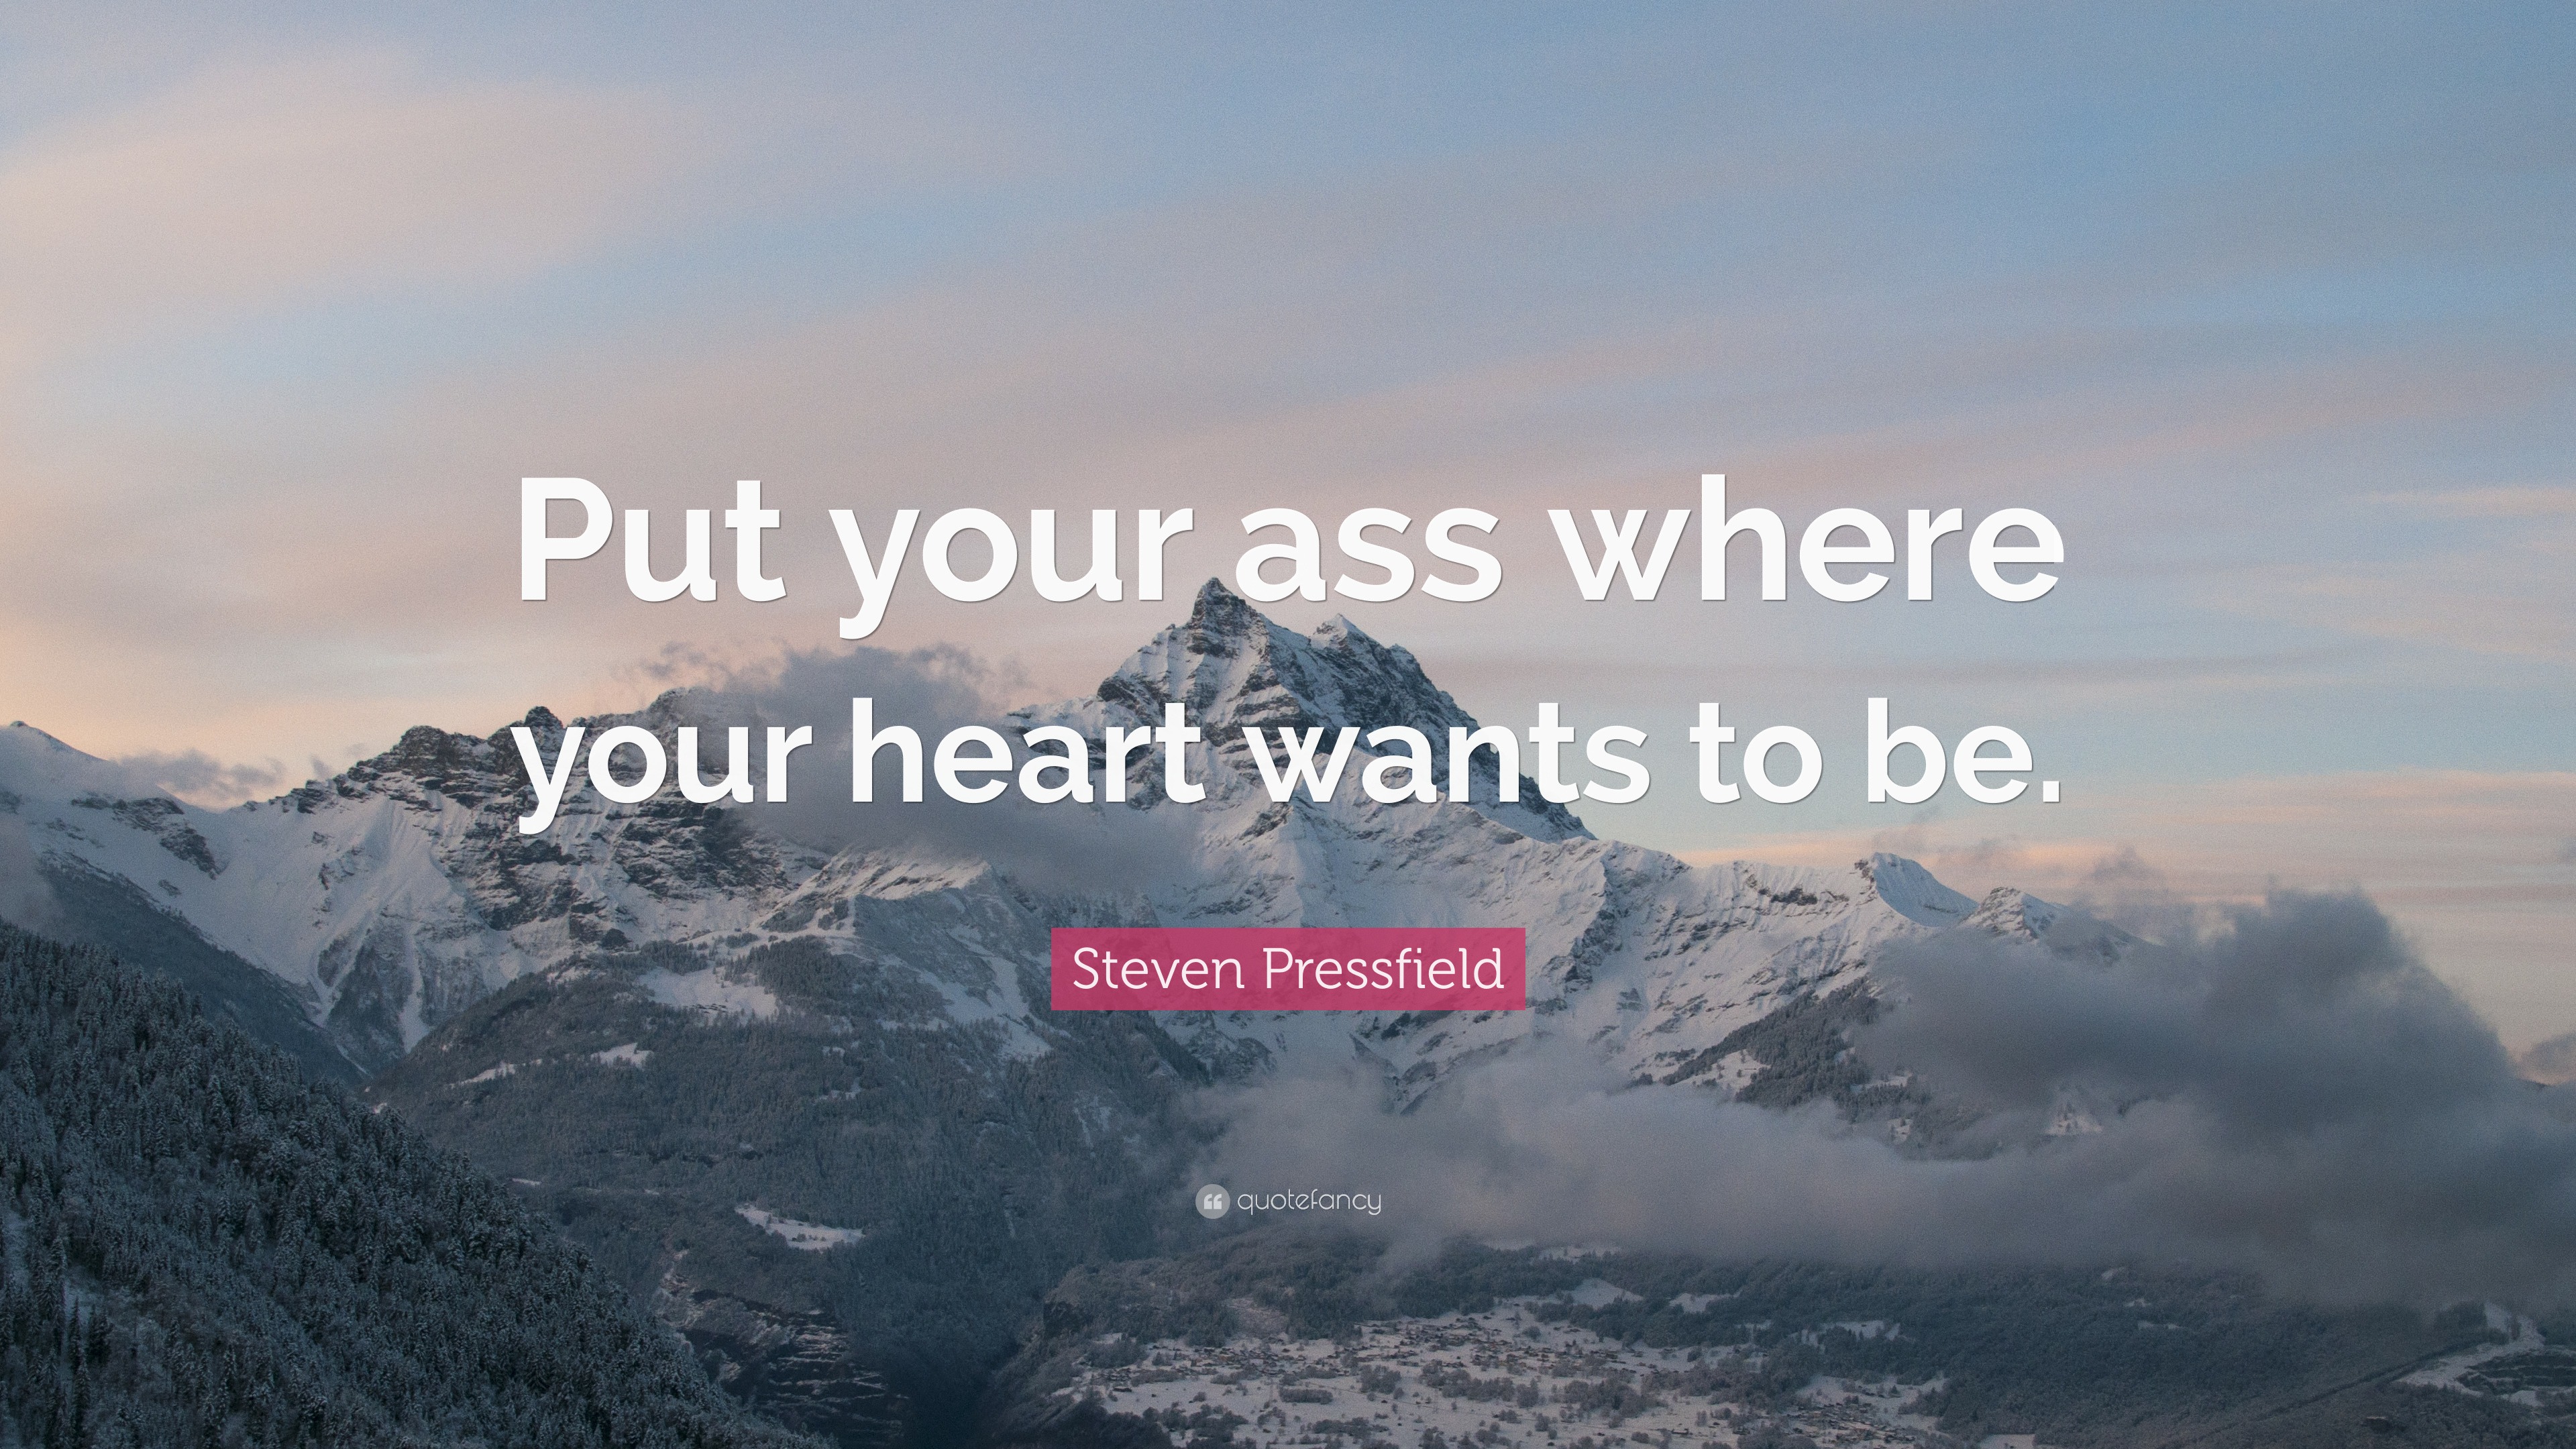 Steven Pressfield: Put Your A** Where Your Heart Wants to Be- Video